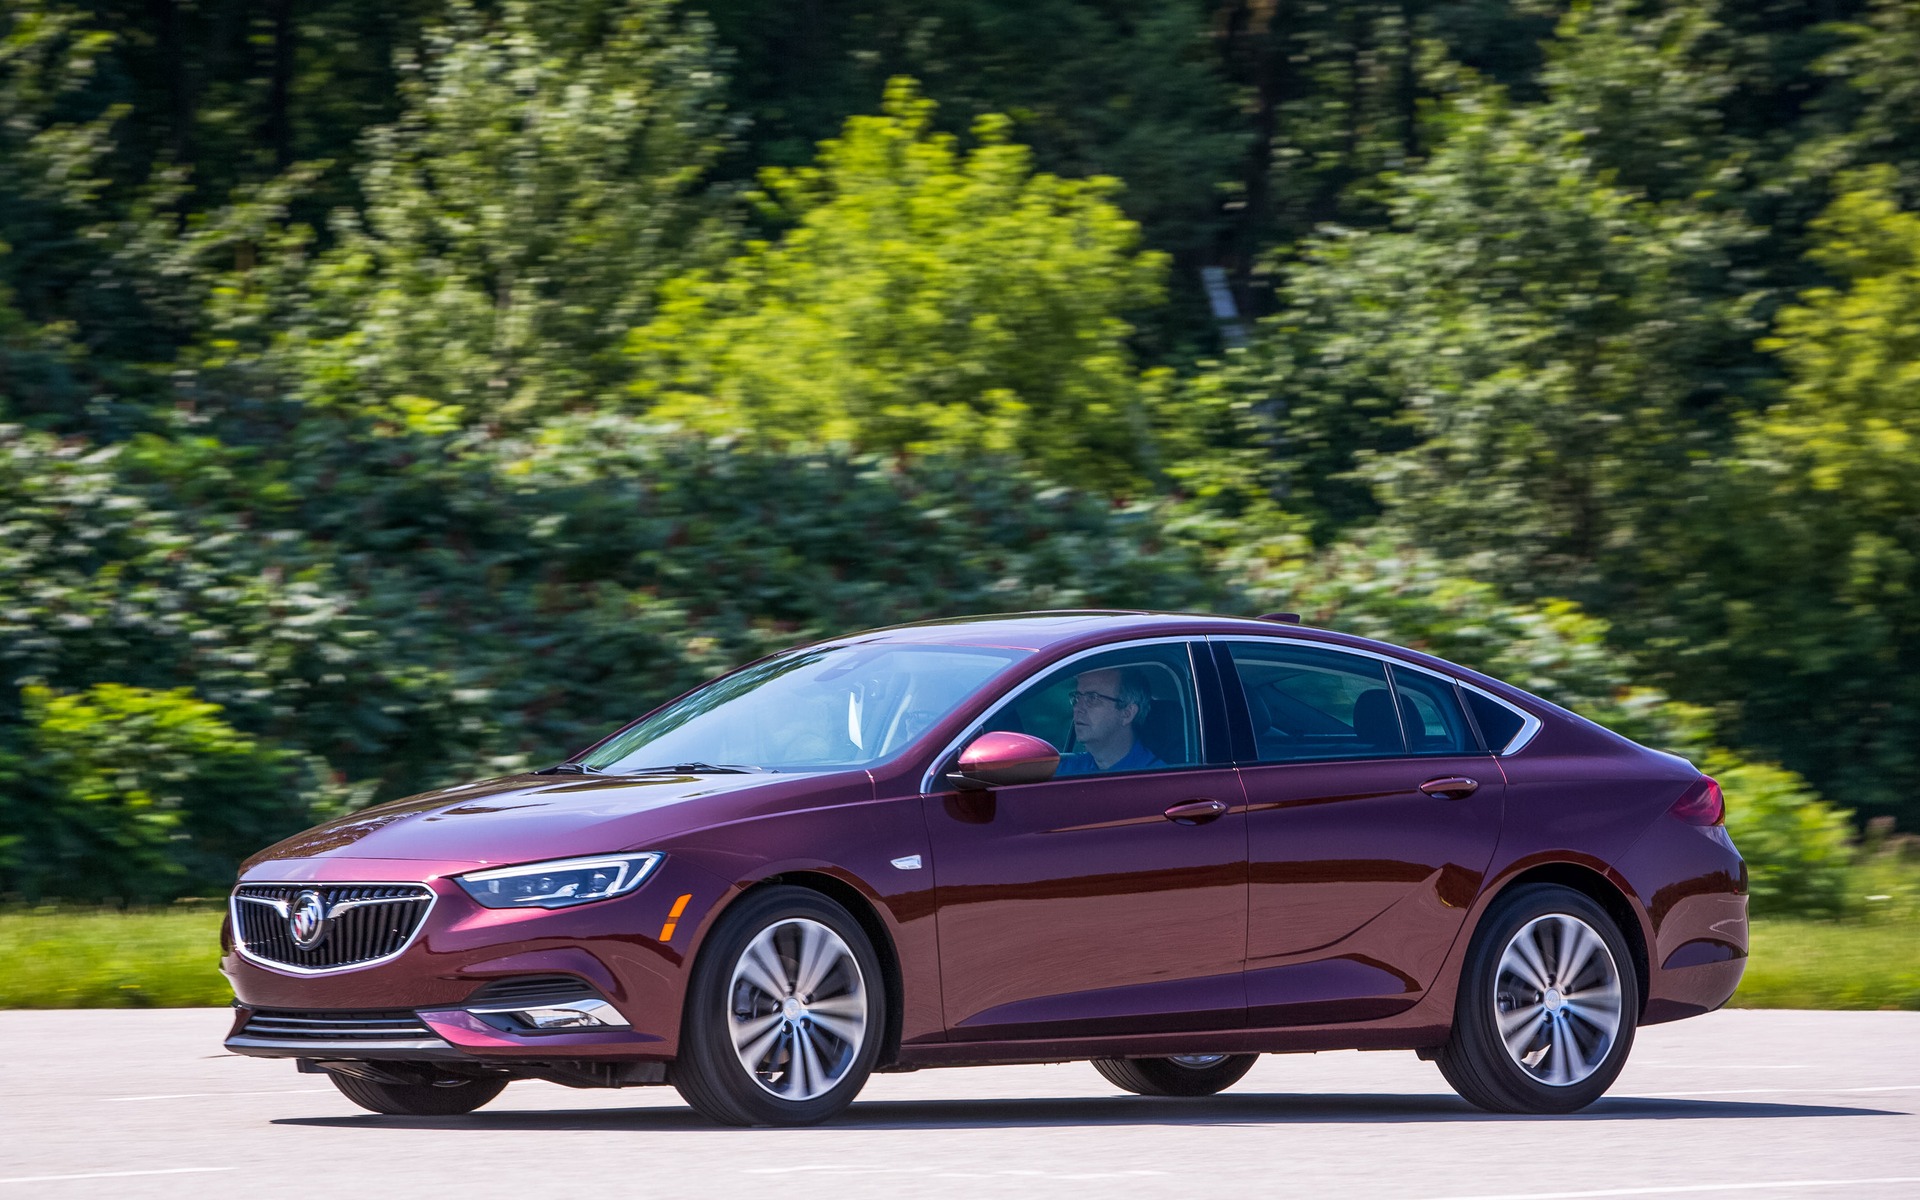 We're Heading Texas to Drive the New 2018 Buick Regal Sportback! - The